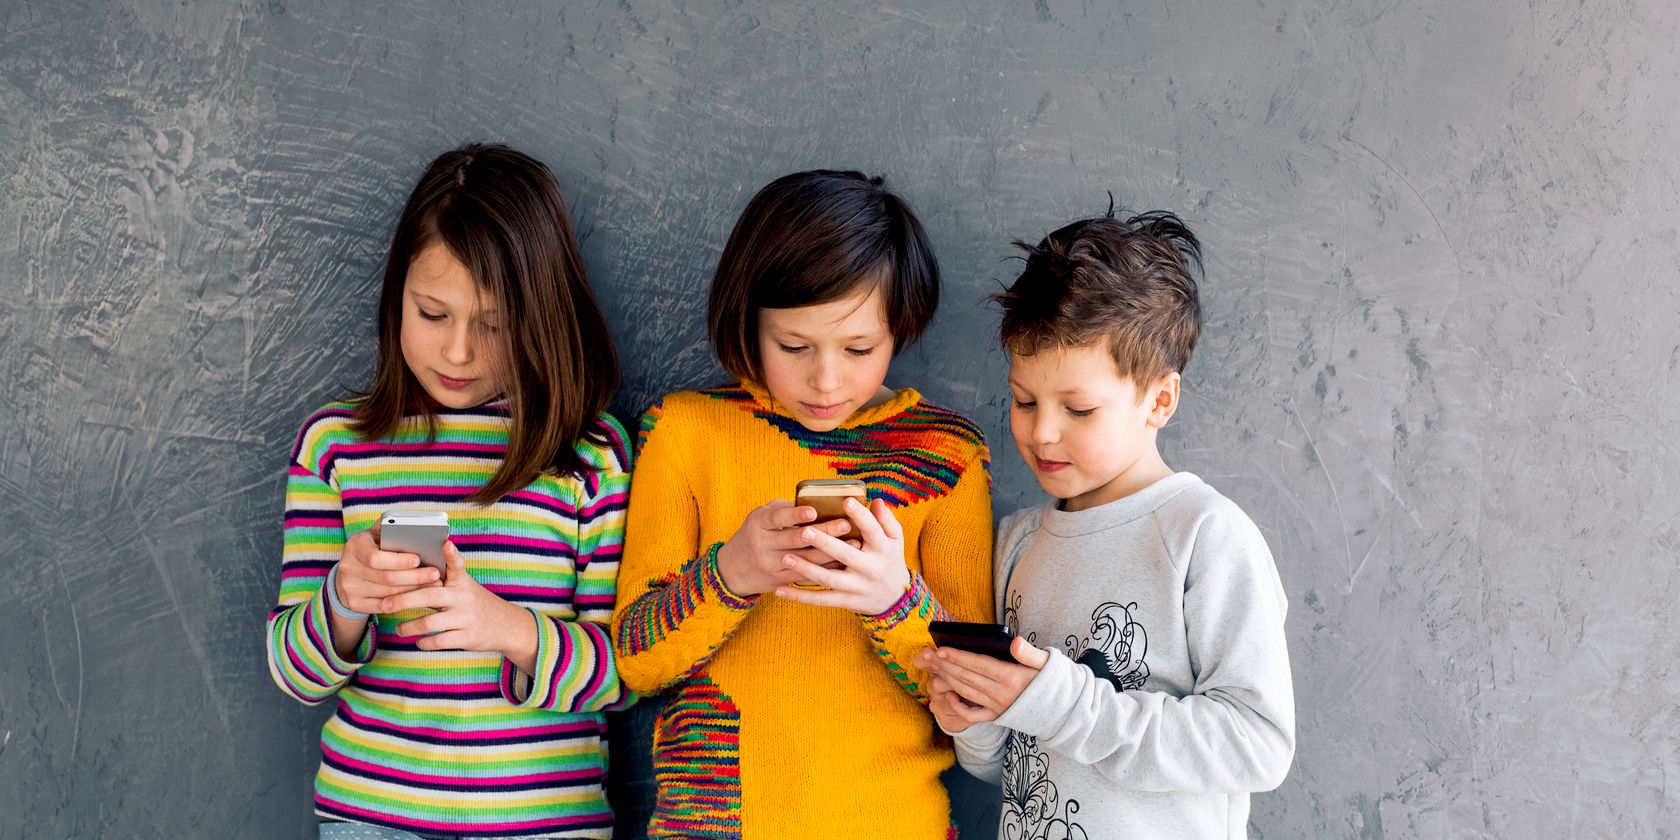 kids looking at their smartphone devices